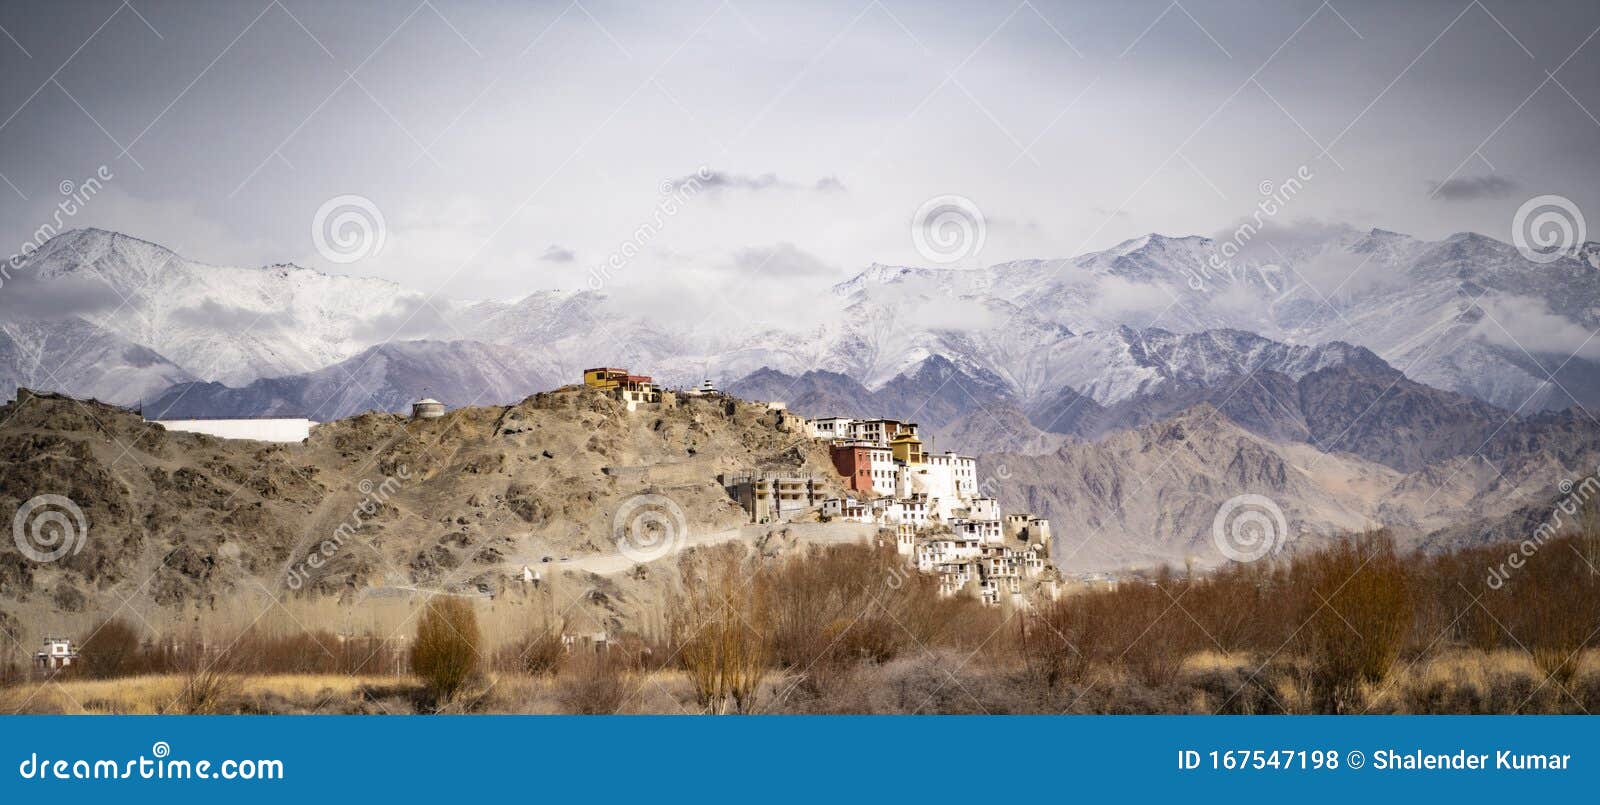 stupa and monastery view of himalayan mountians - it is a famous buddhist temple in,leh, ladakh, jammu and kashmir, india.